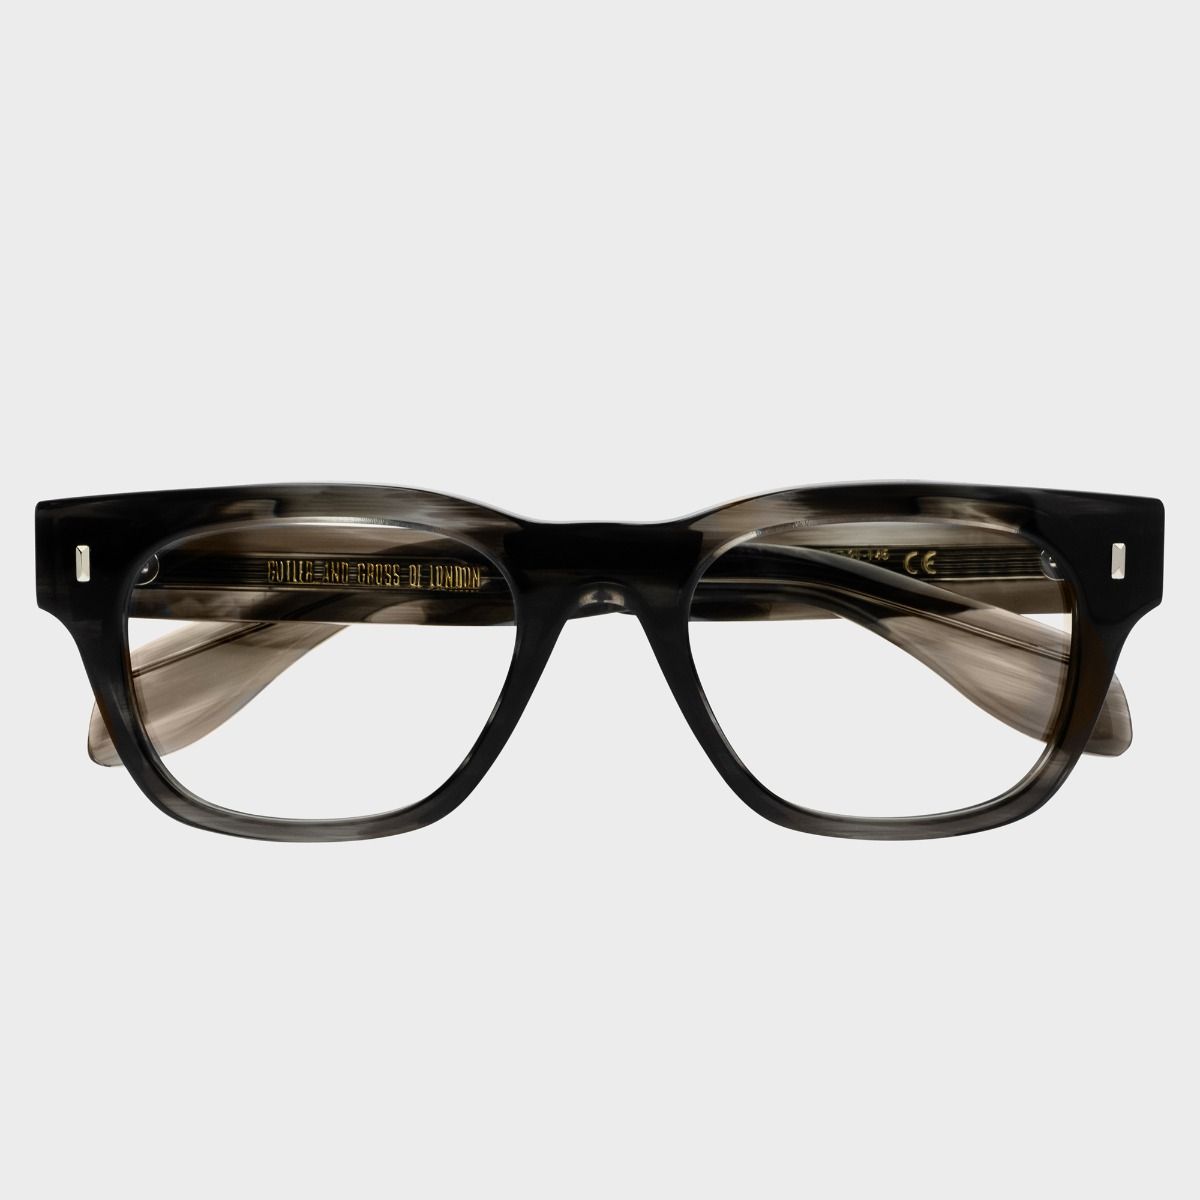 Cutler and Gross, 9772 Optical Square Glasses - Green Smoke